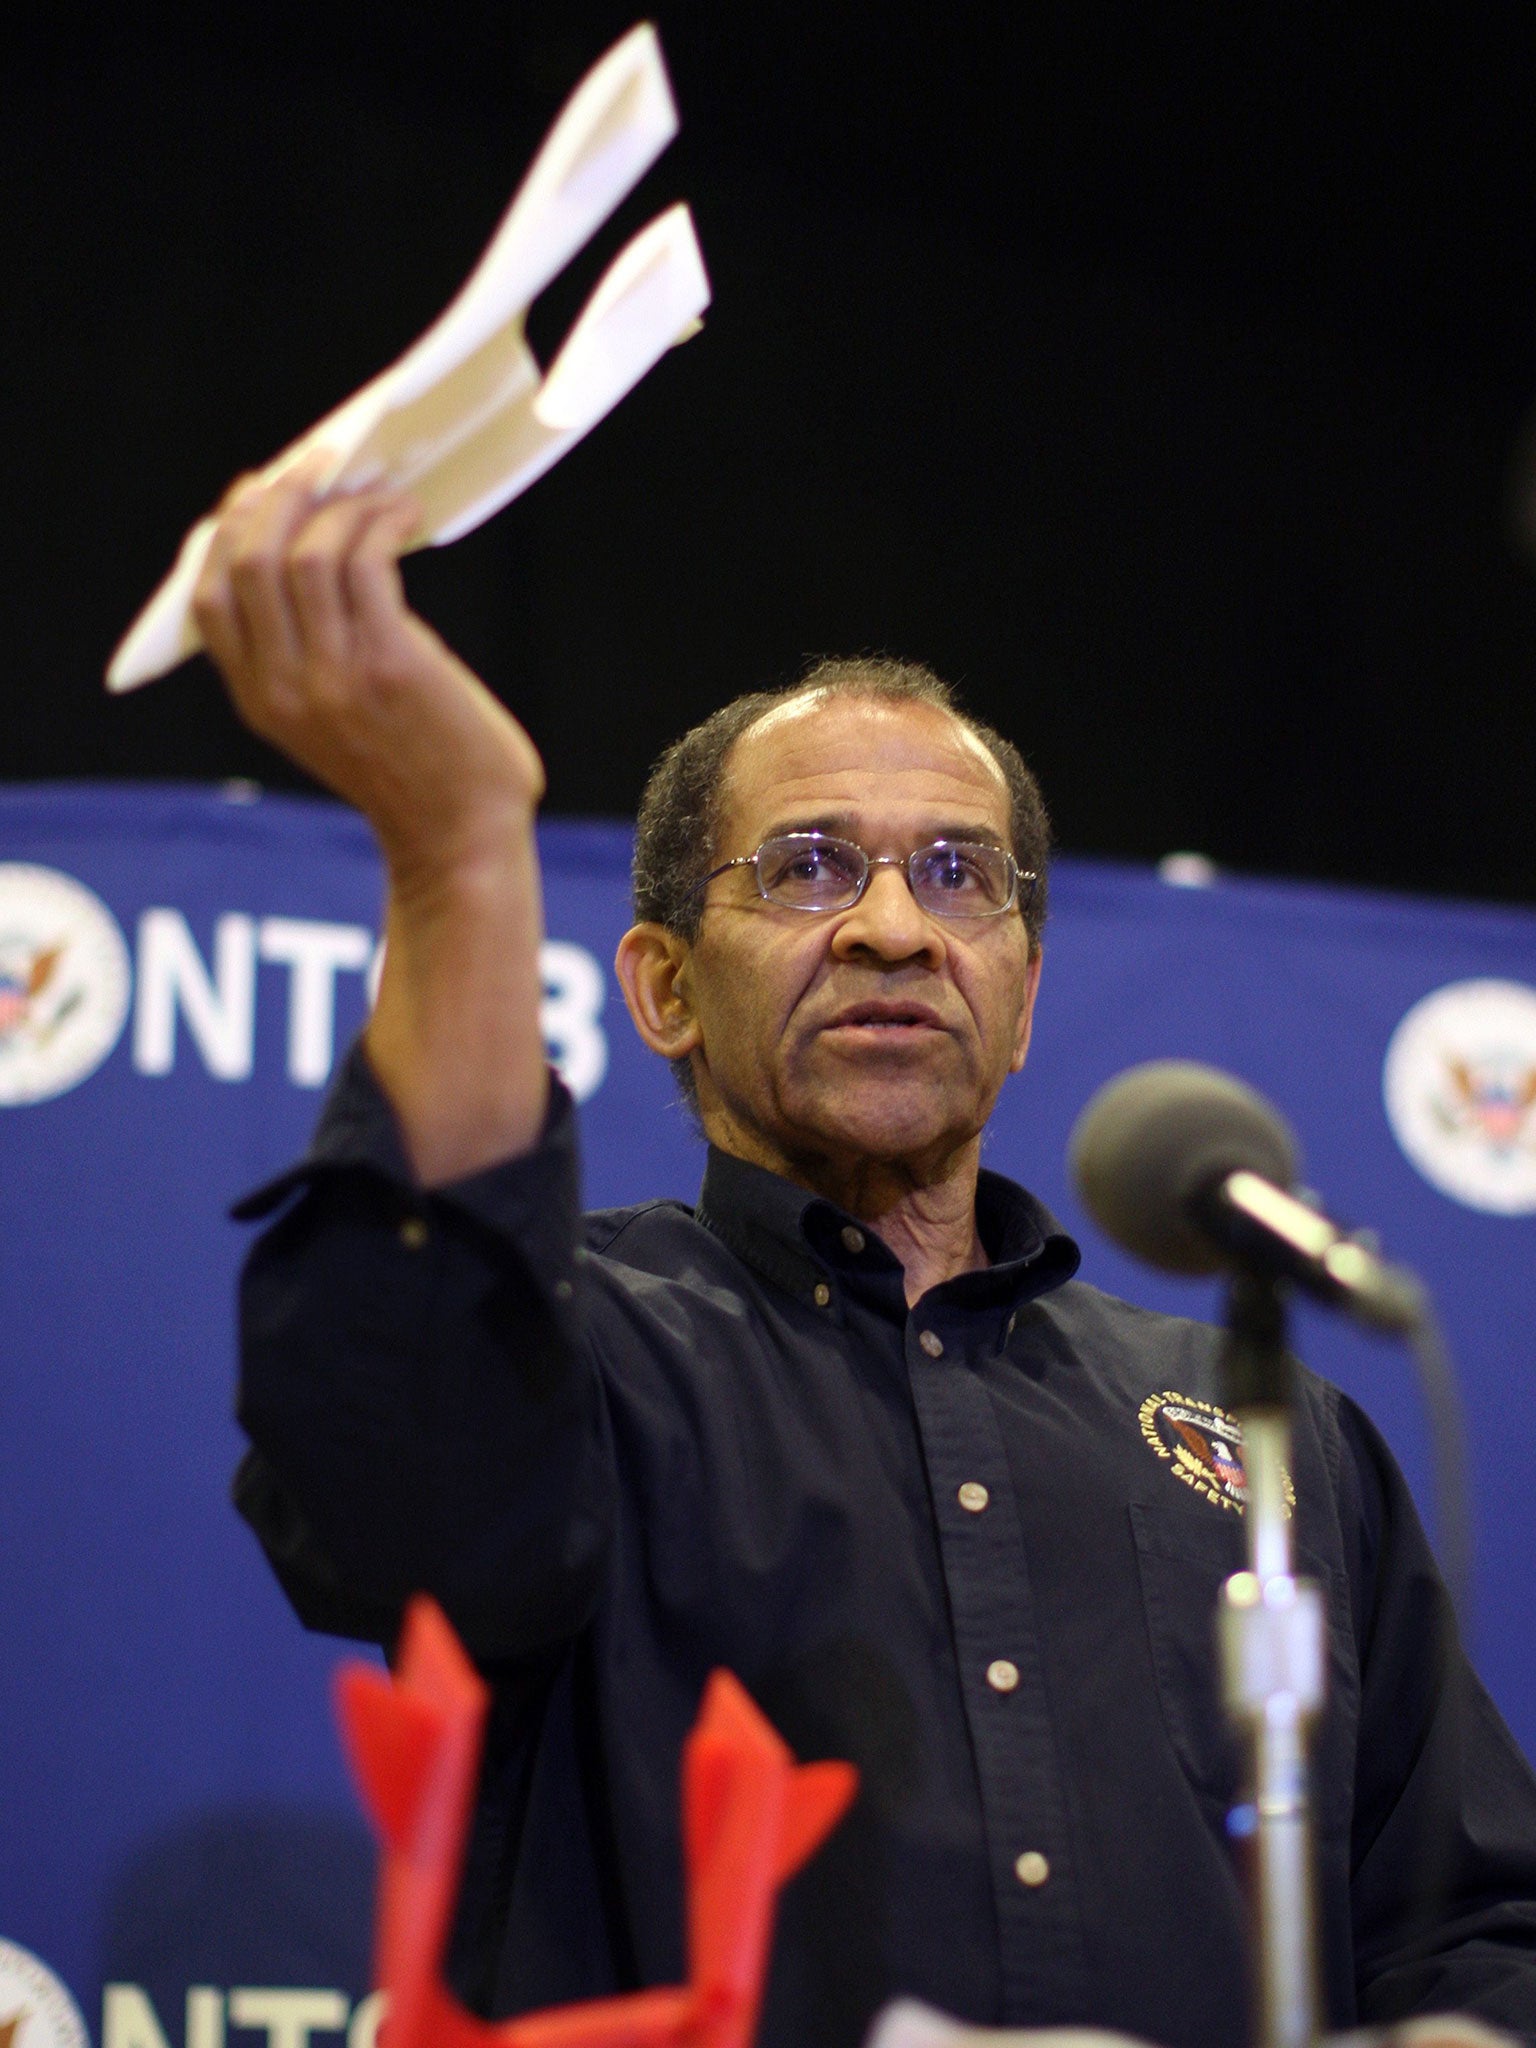 Christopher Hart, acting chairman of the National Transportation Safety Board (NTSB), during a news conference in Mojave, California